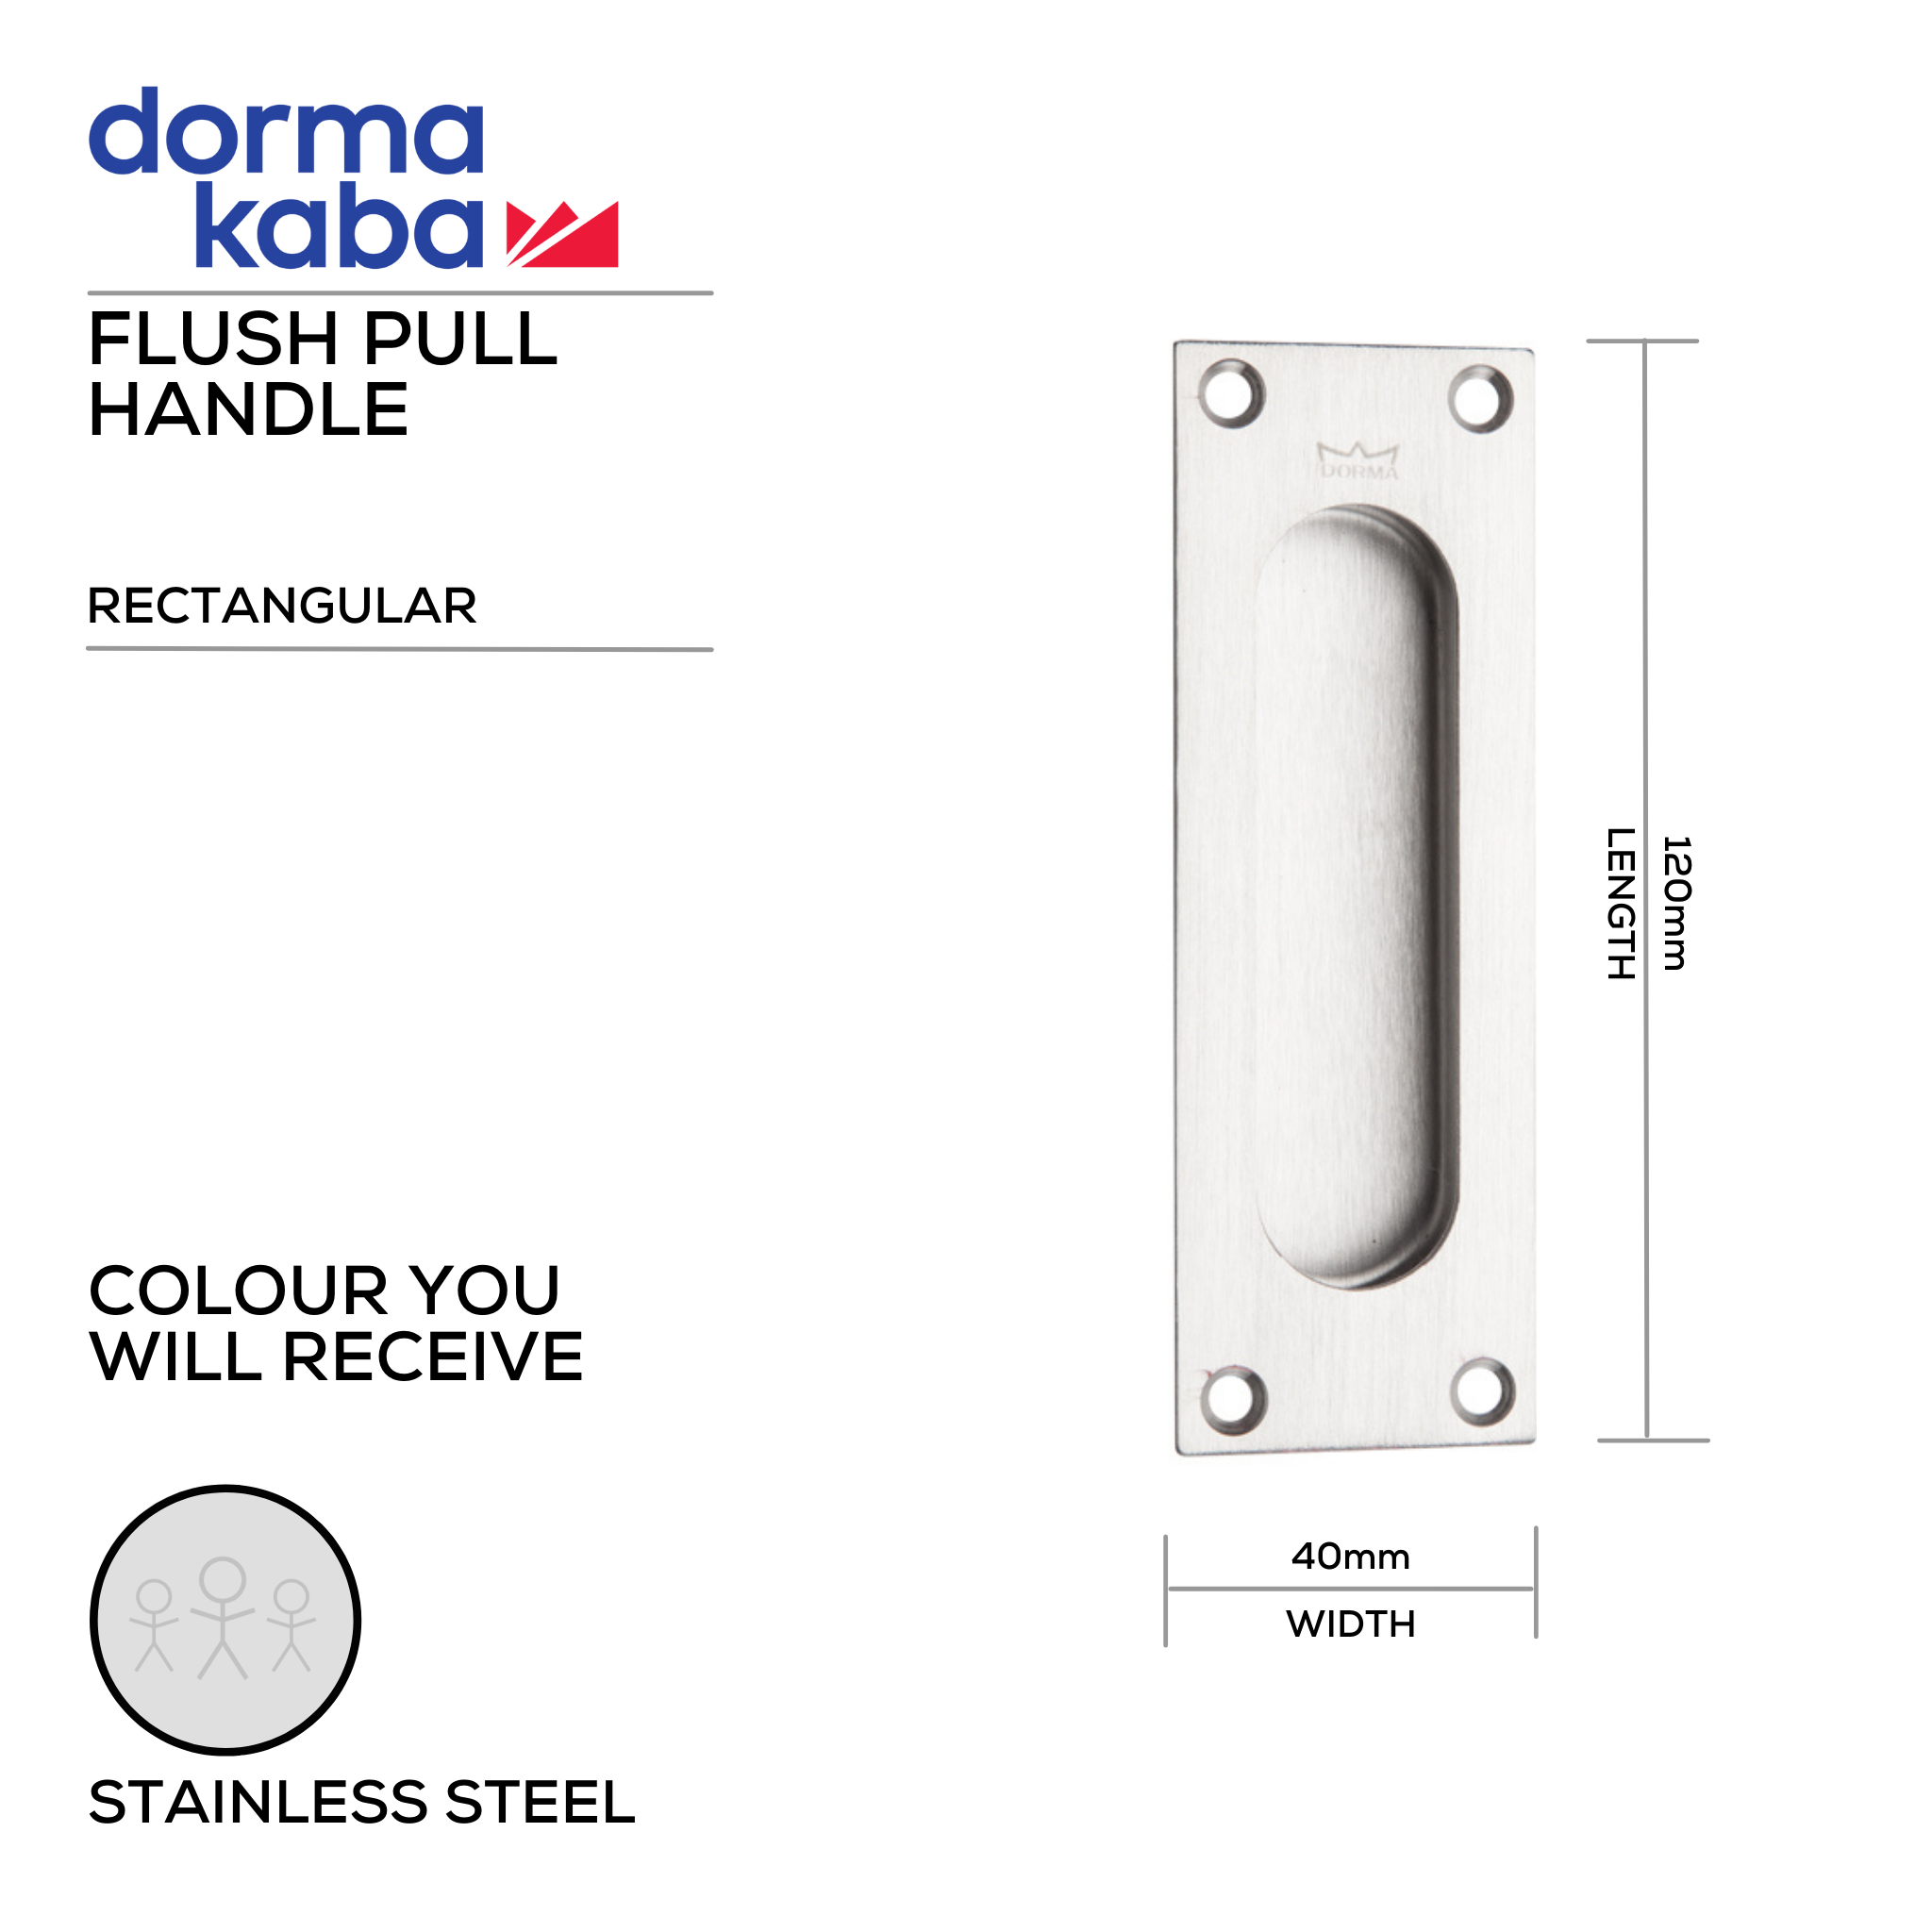 DFP-SS-025, Pull Handle, Recessed, Flush, Rectangular, 120mm (l) x 40mm (w), Stainless Steel, DORMAKABA